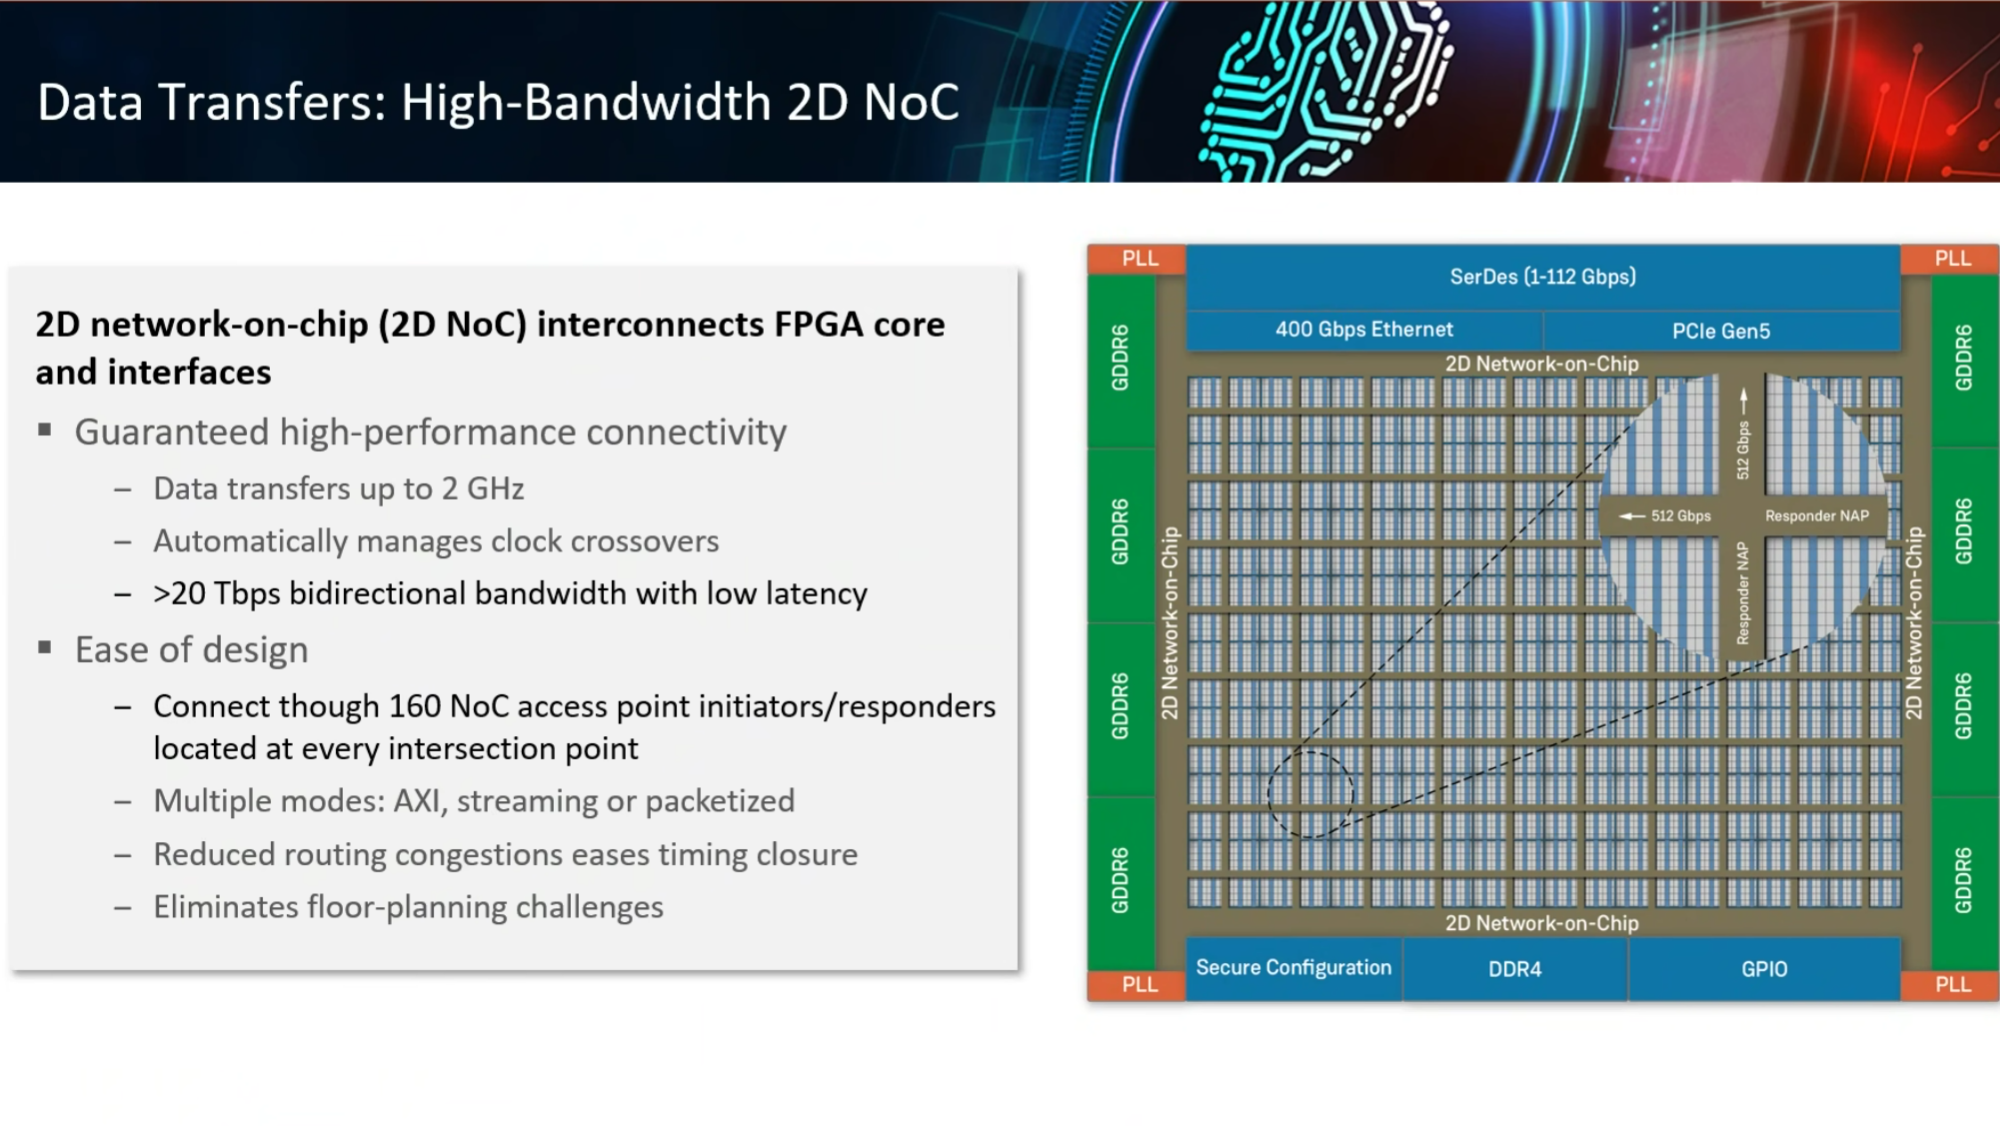 Crucial to FPGA acceleration of generative AI is the 2D NoC in the Achronix Speedster 7t